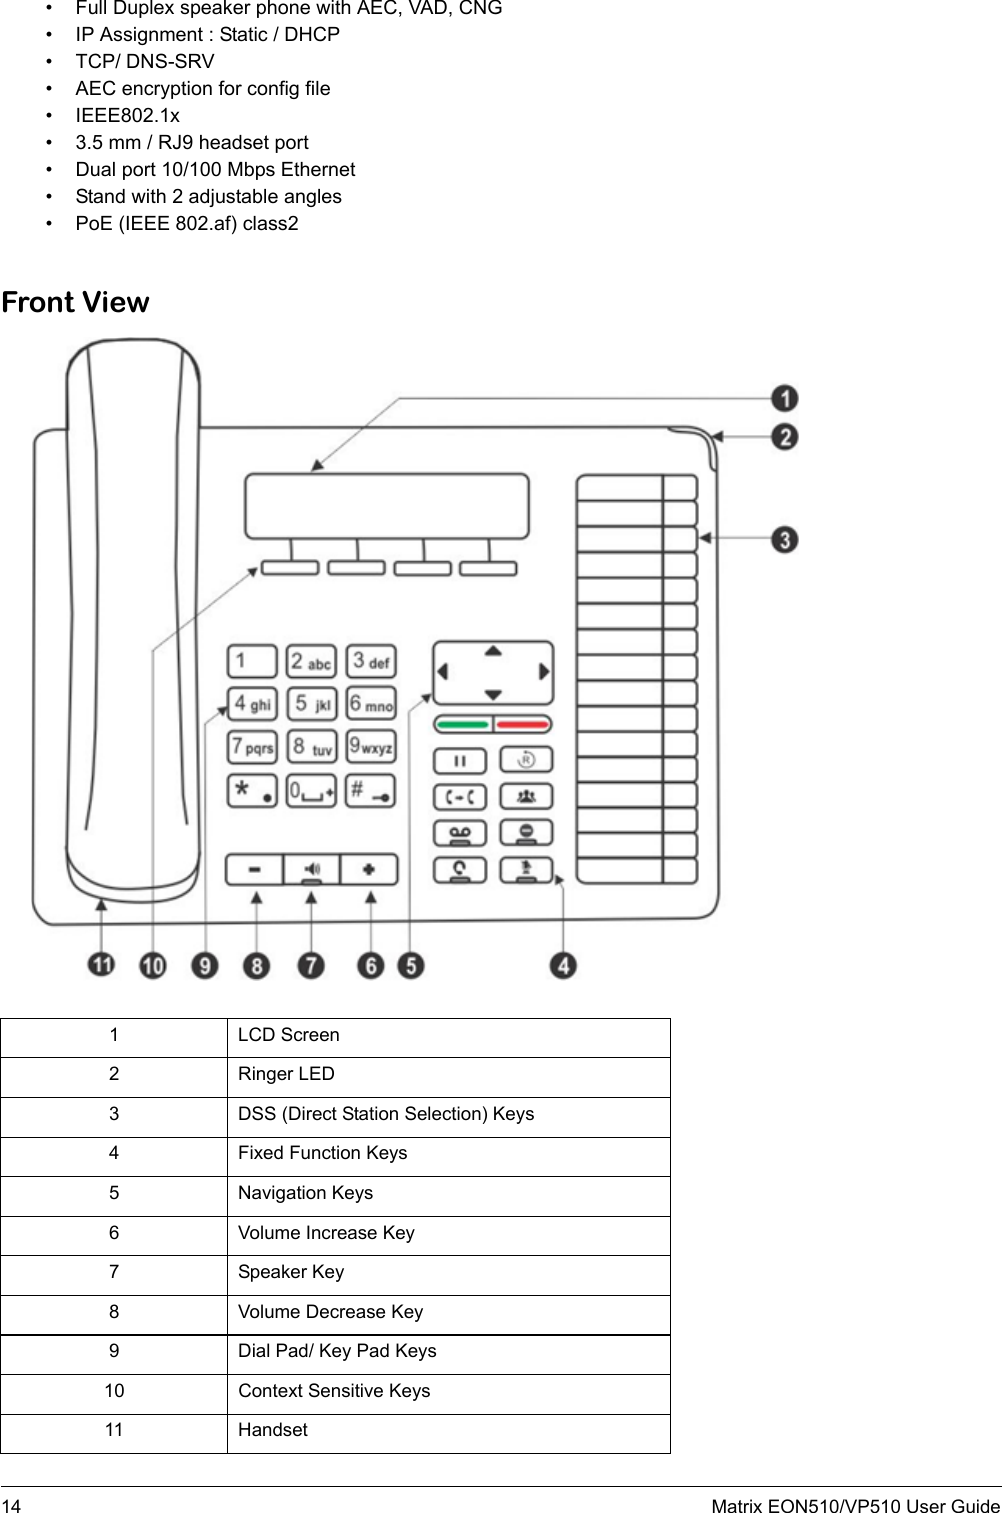 14 Matrix EON510/VP510 User Guide• Full Duplex speaker phone with AEC, VAD, CNG• IP Assignment : Static / DHCP• TCP/ DNS-SRV• AEC encryption for config file• IEEE802.1x• 3.5 mm / RJ9 headset port• Dual port 10/100 Mbps Ethernet• Stand with 2 adjustable angles• PoE (IEEE 802.af) class2Front View1 LCD Screen2 Ringer LED3 DSS (Direct Station Selection) Keys4 Fixed Function Keys5 Navigation Keys6 Volume Increase Key7 Speaker Key8 Volume Decrease Key9 Dial Pad/ Key Pad Keys10 Context Sensitive Keys11 Handset